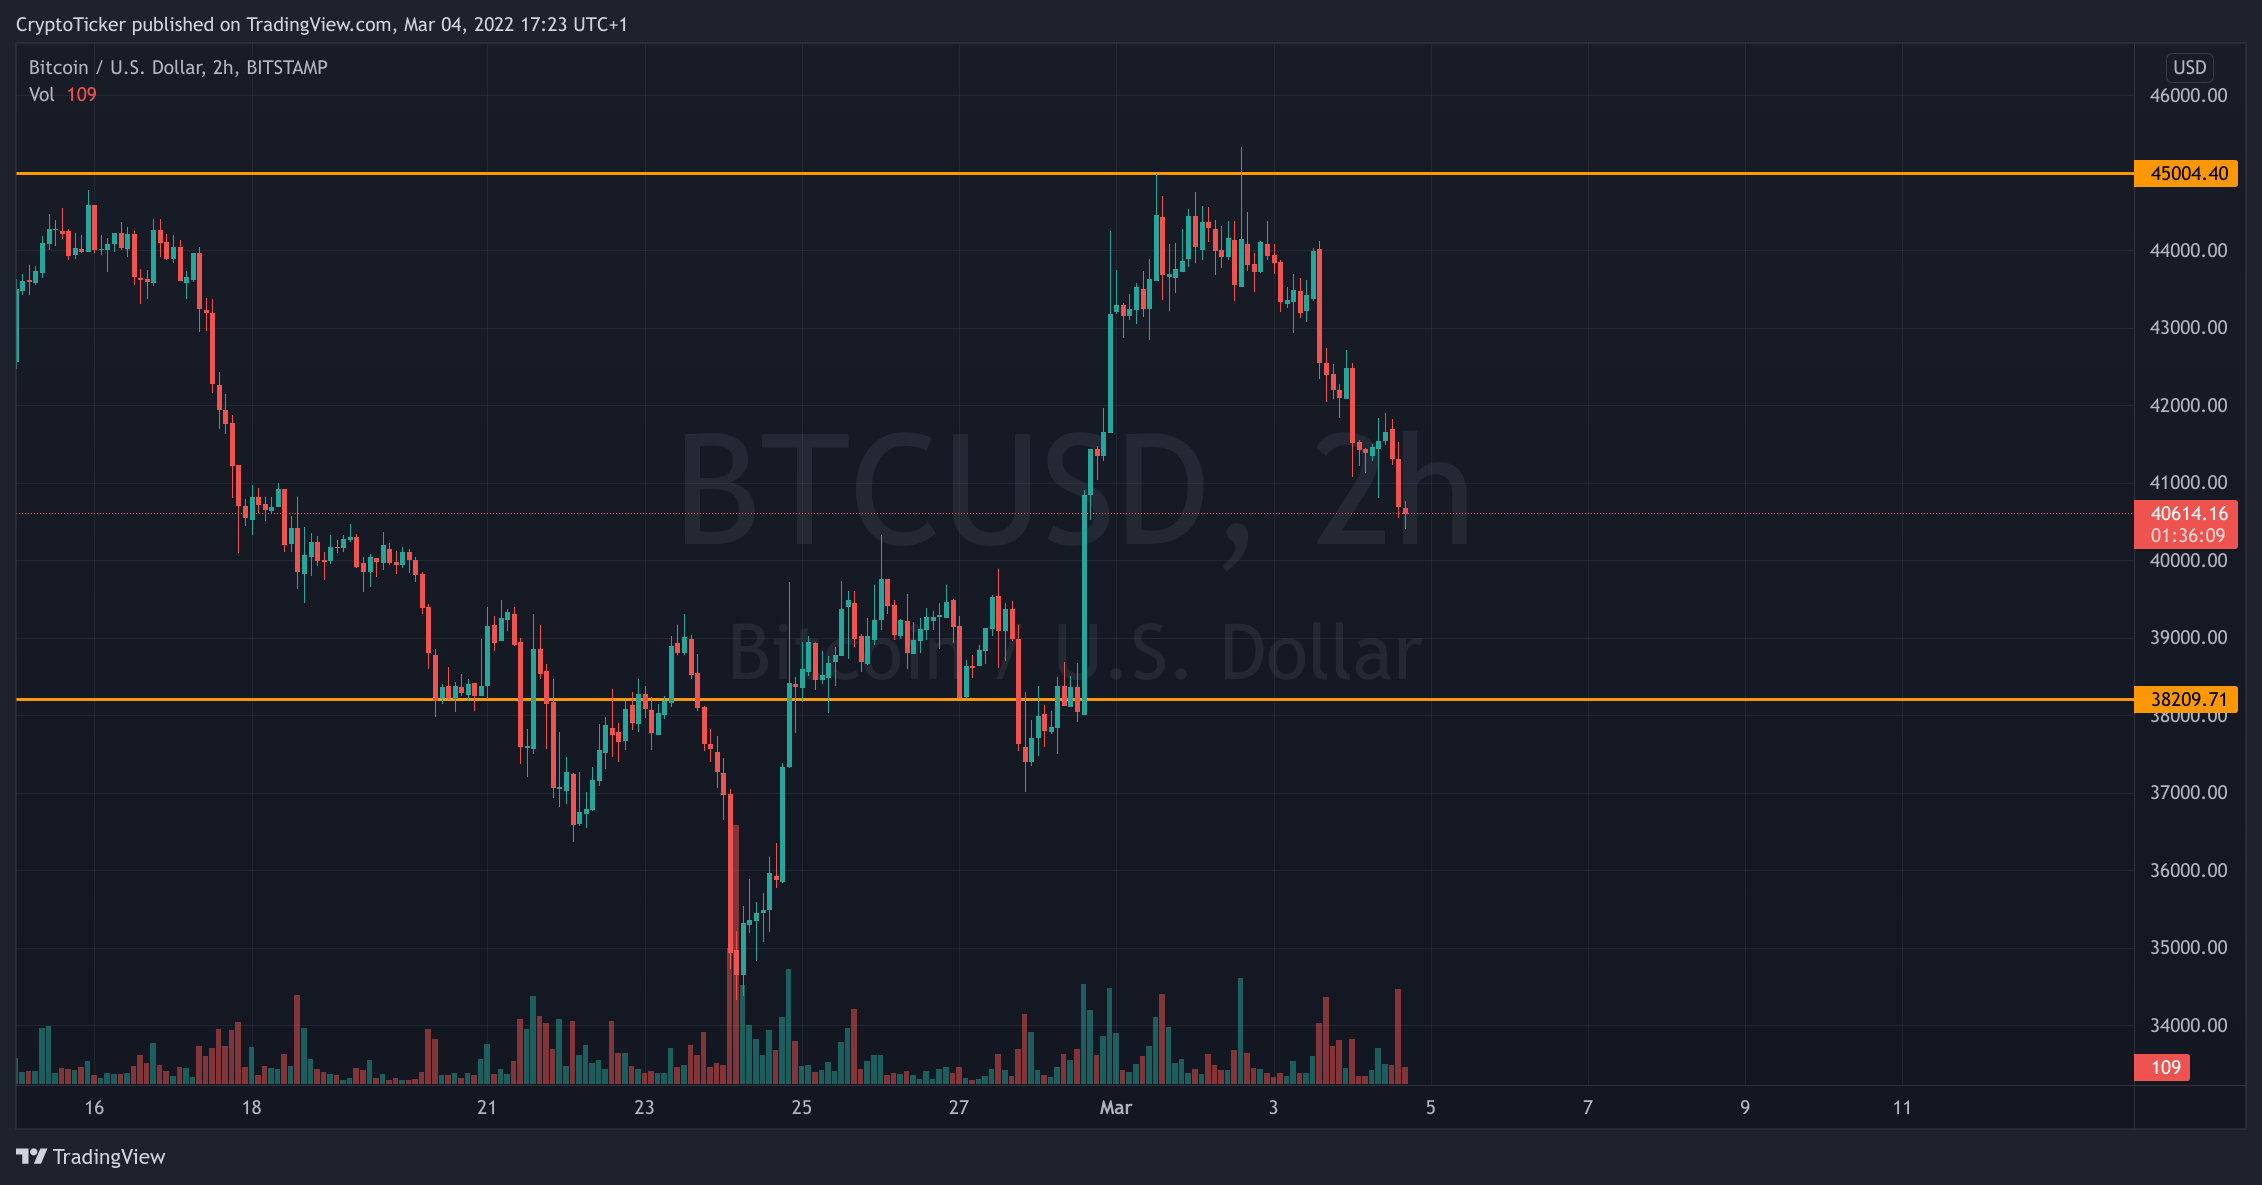 BTC/USD 2-hours chart showing important price areas of BTC